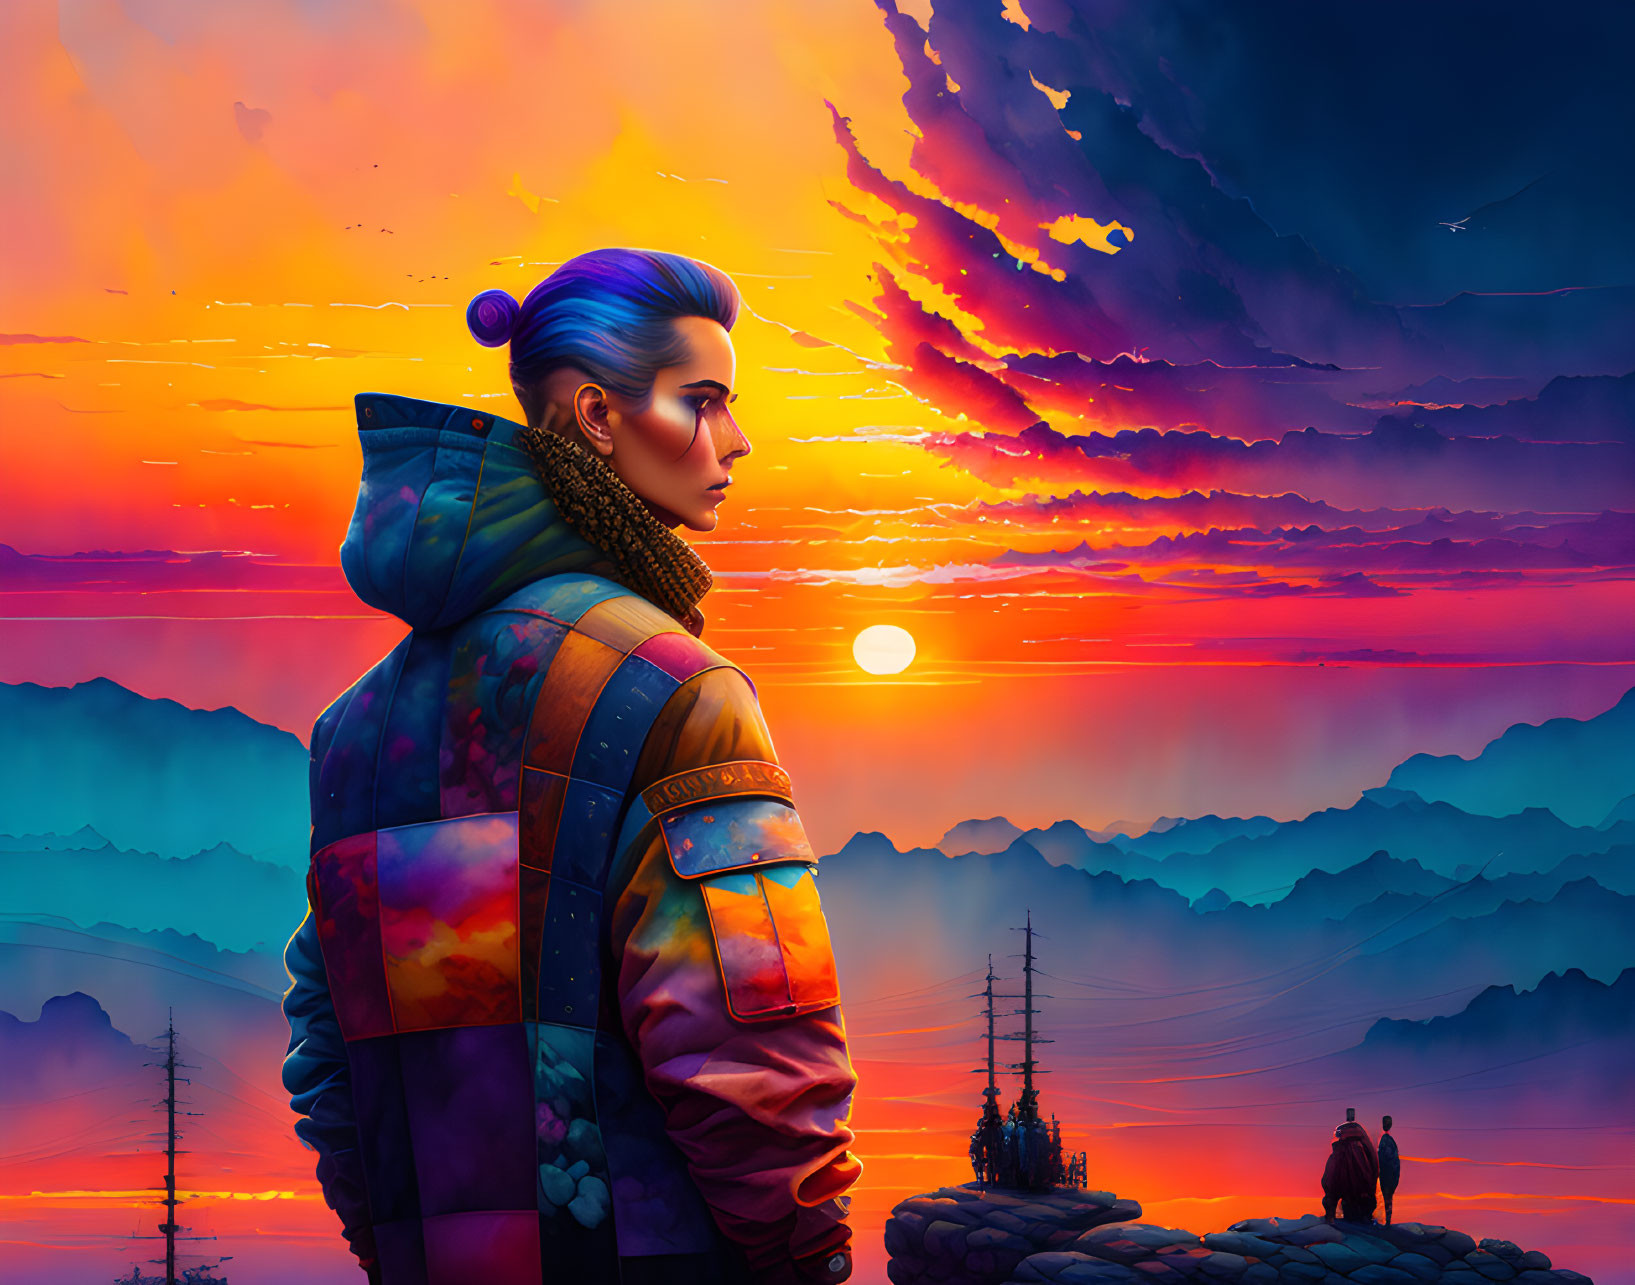 Vibrant jacket-wearing person gazes at surreal sunset with silhouetted mountains